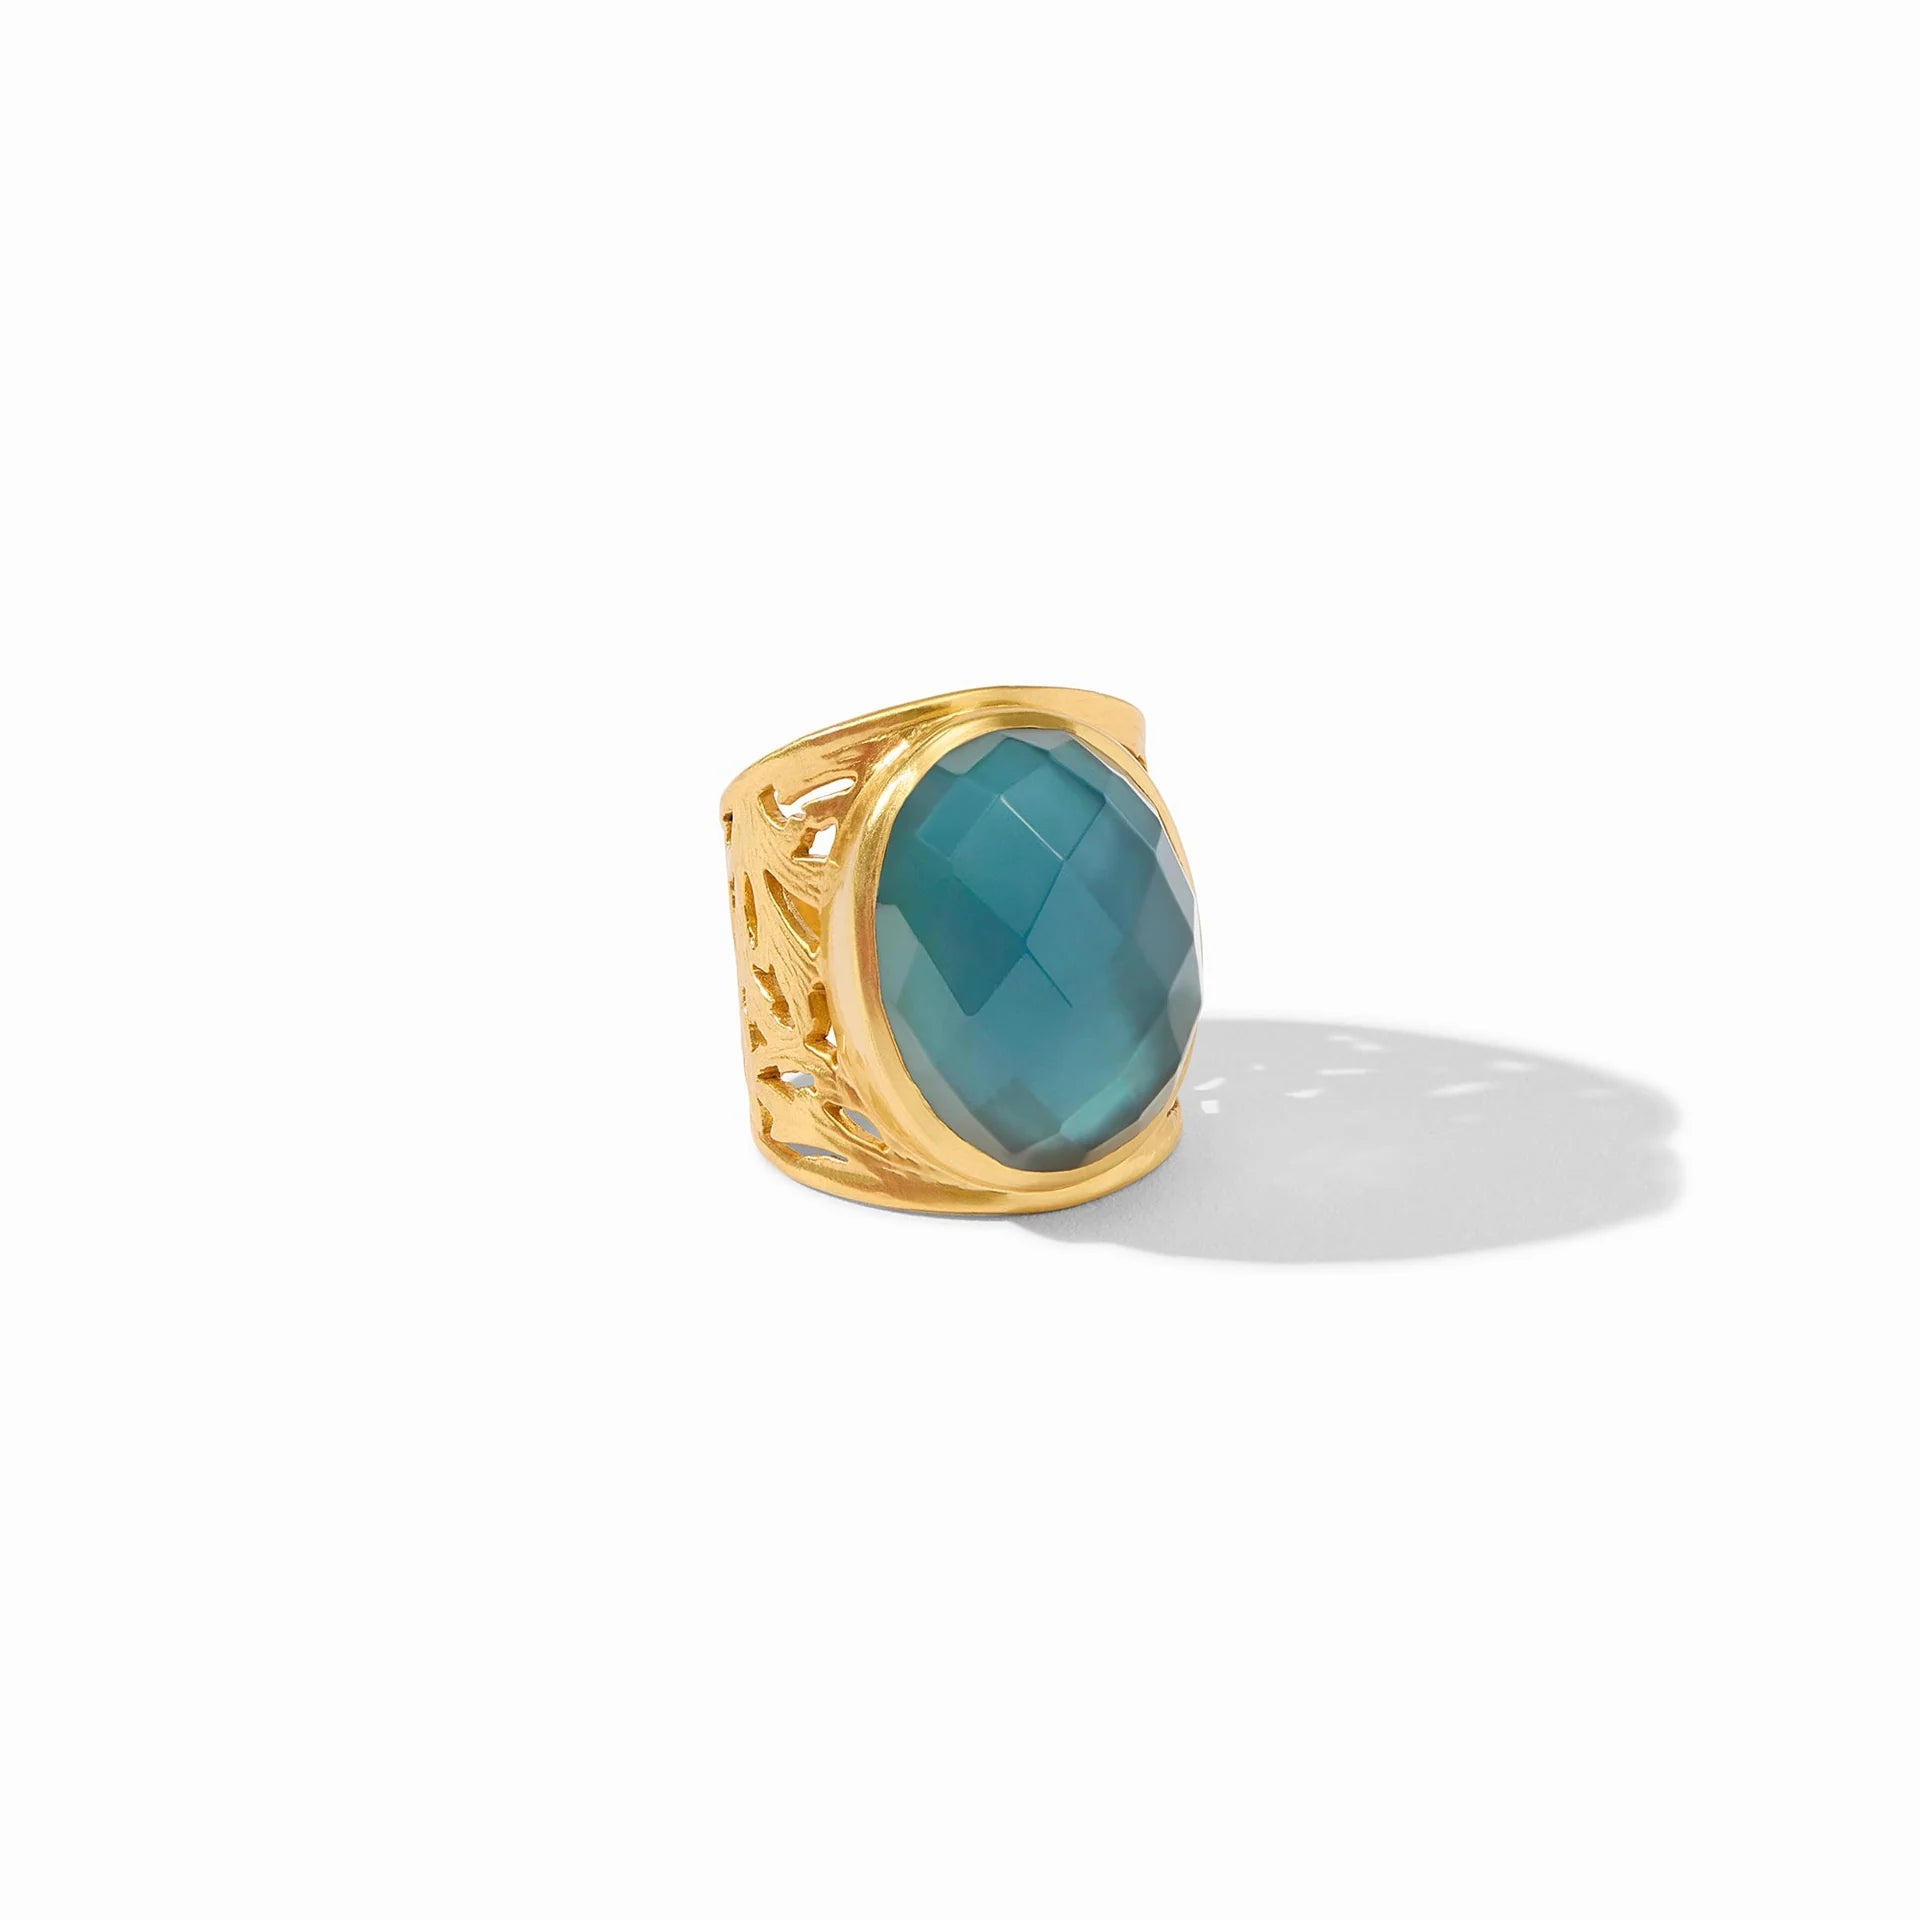 Julie Vos Ivy Statement Ring - Iridescent Peacock Blue, Size 8